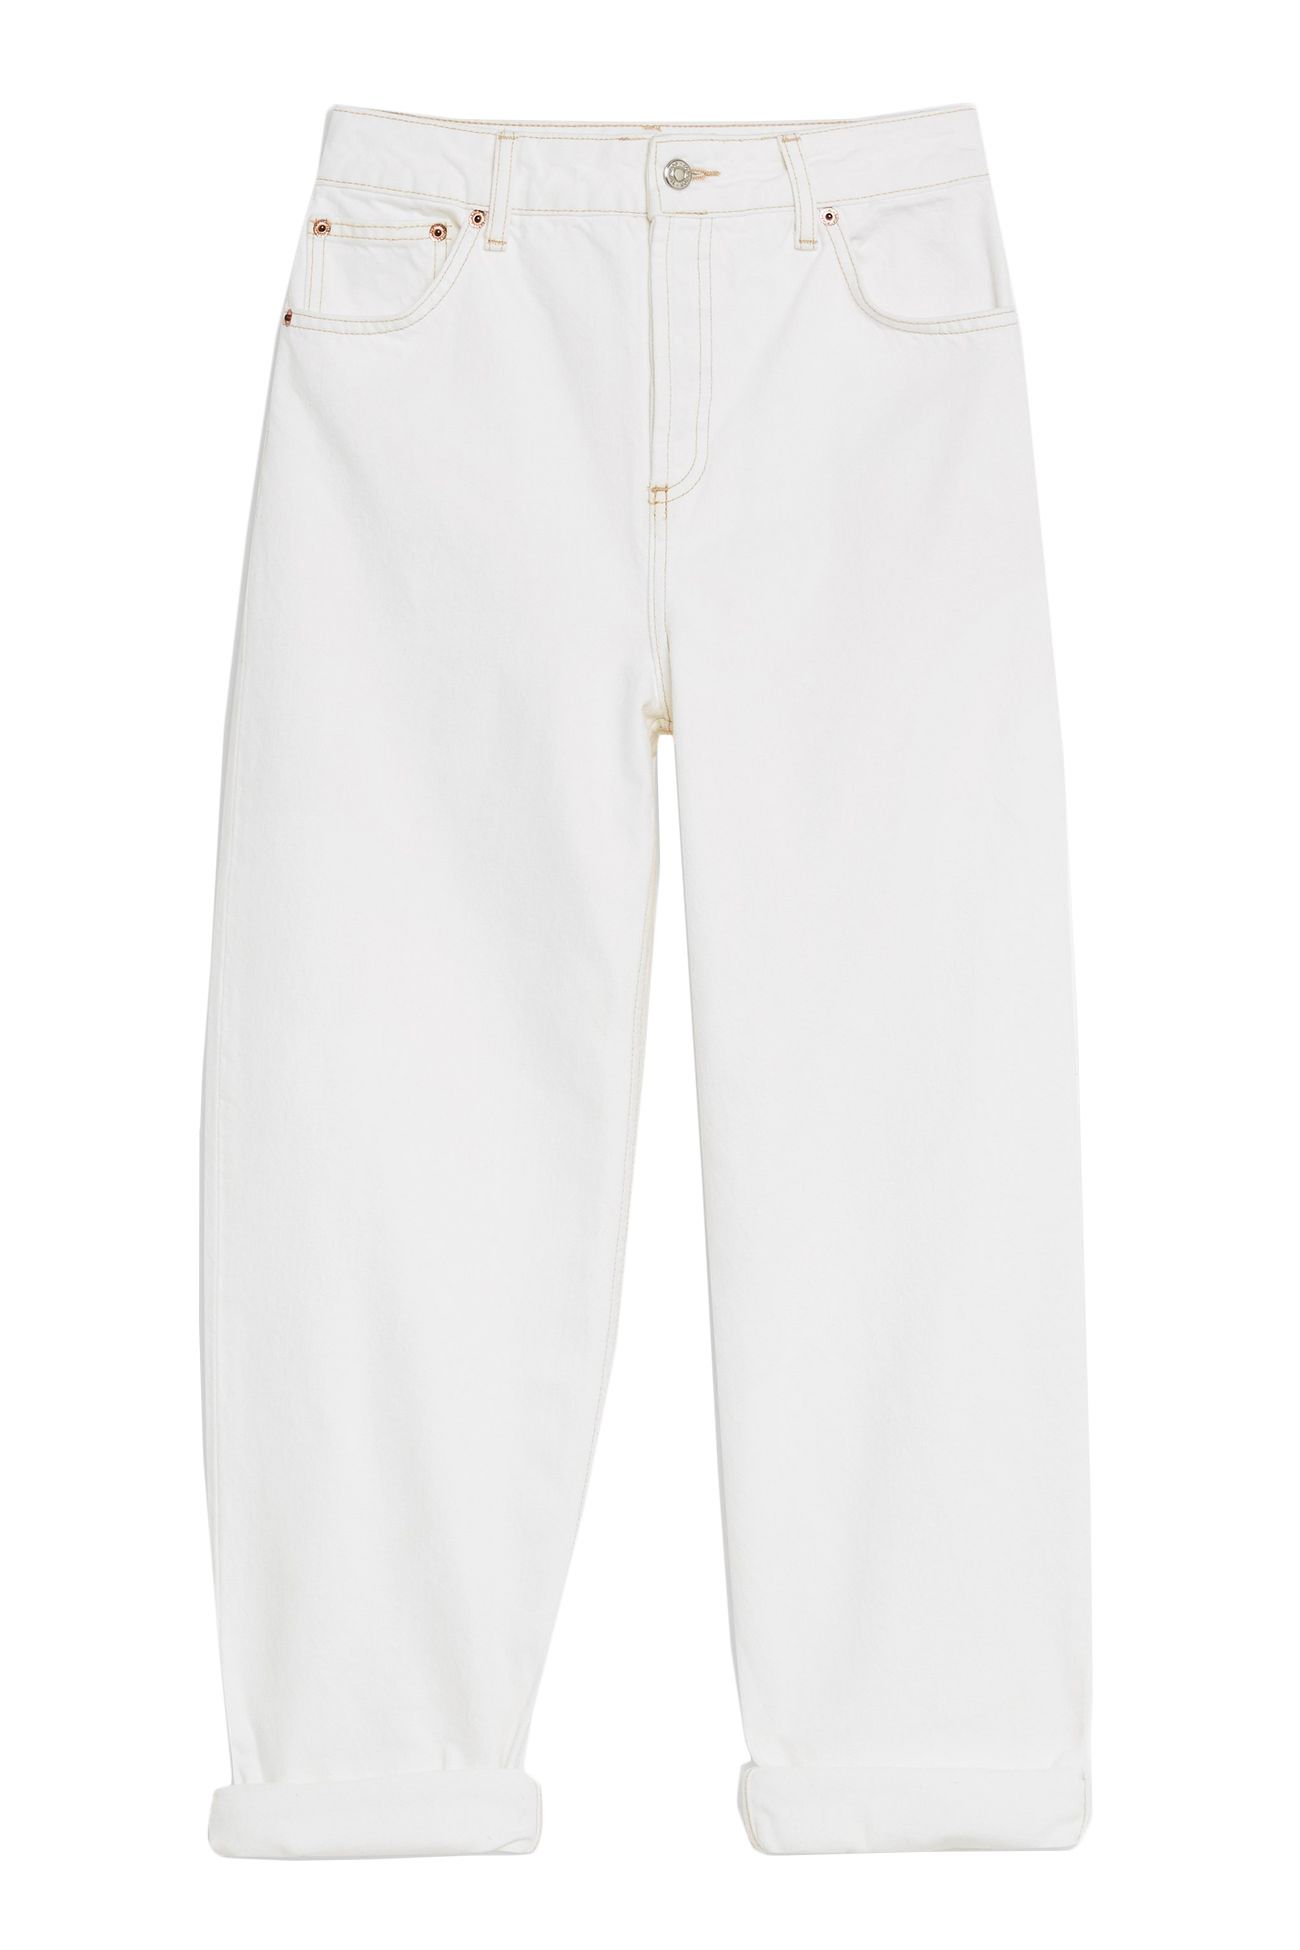 baggy white jeans womens